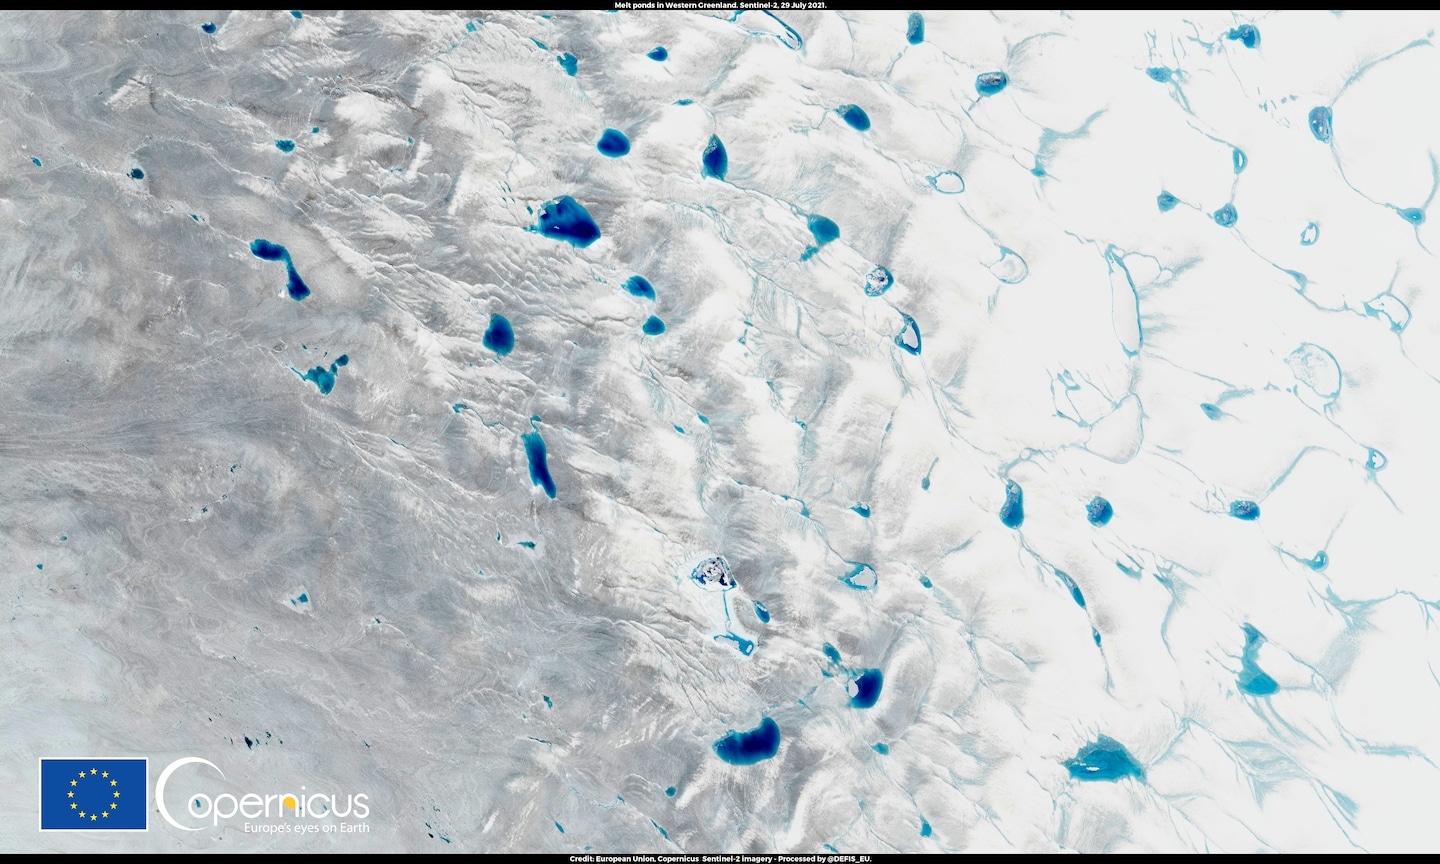 The Greenland ice sheet experienced a massive melting event last week